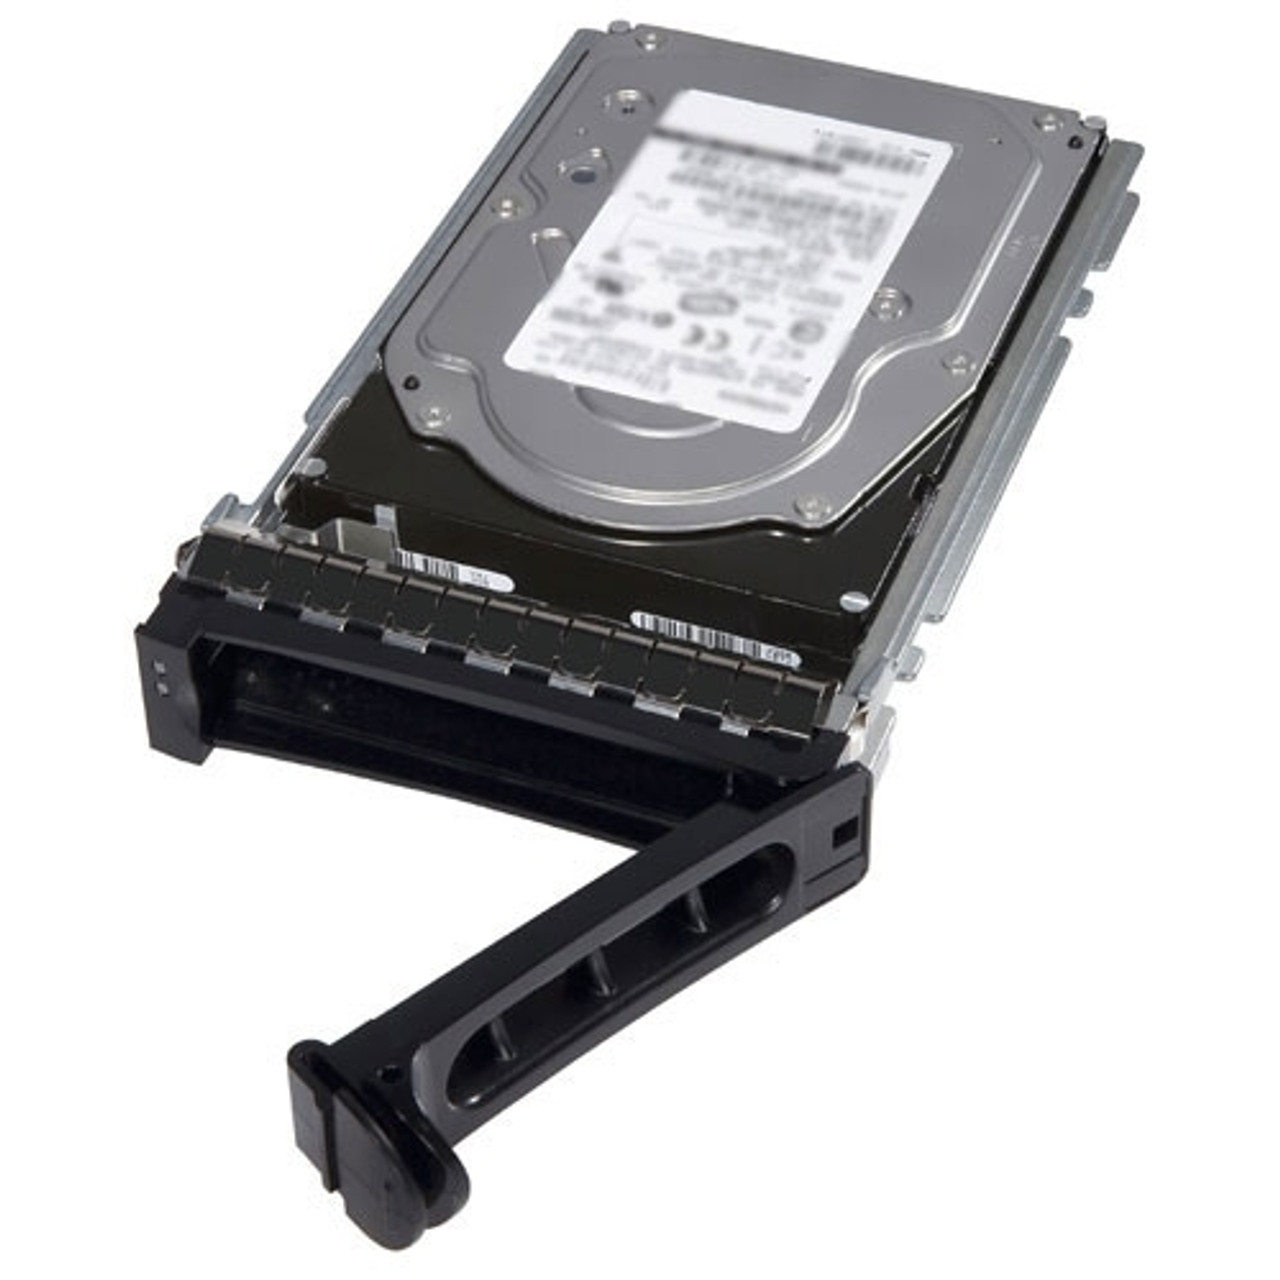 DELL FC272 36gb 15000rpm 80pin Ultra-320 Scsi Hot Swap 3.5inch Hard Disk Drive With Tray